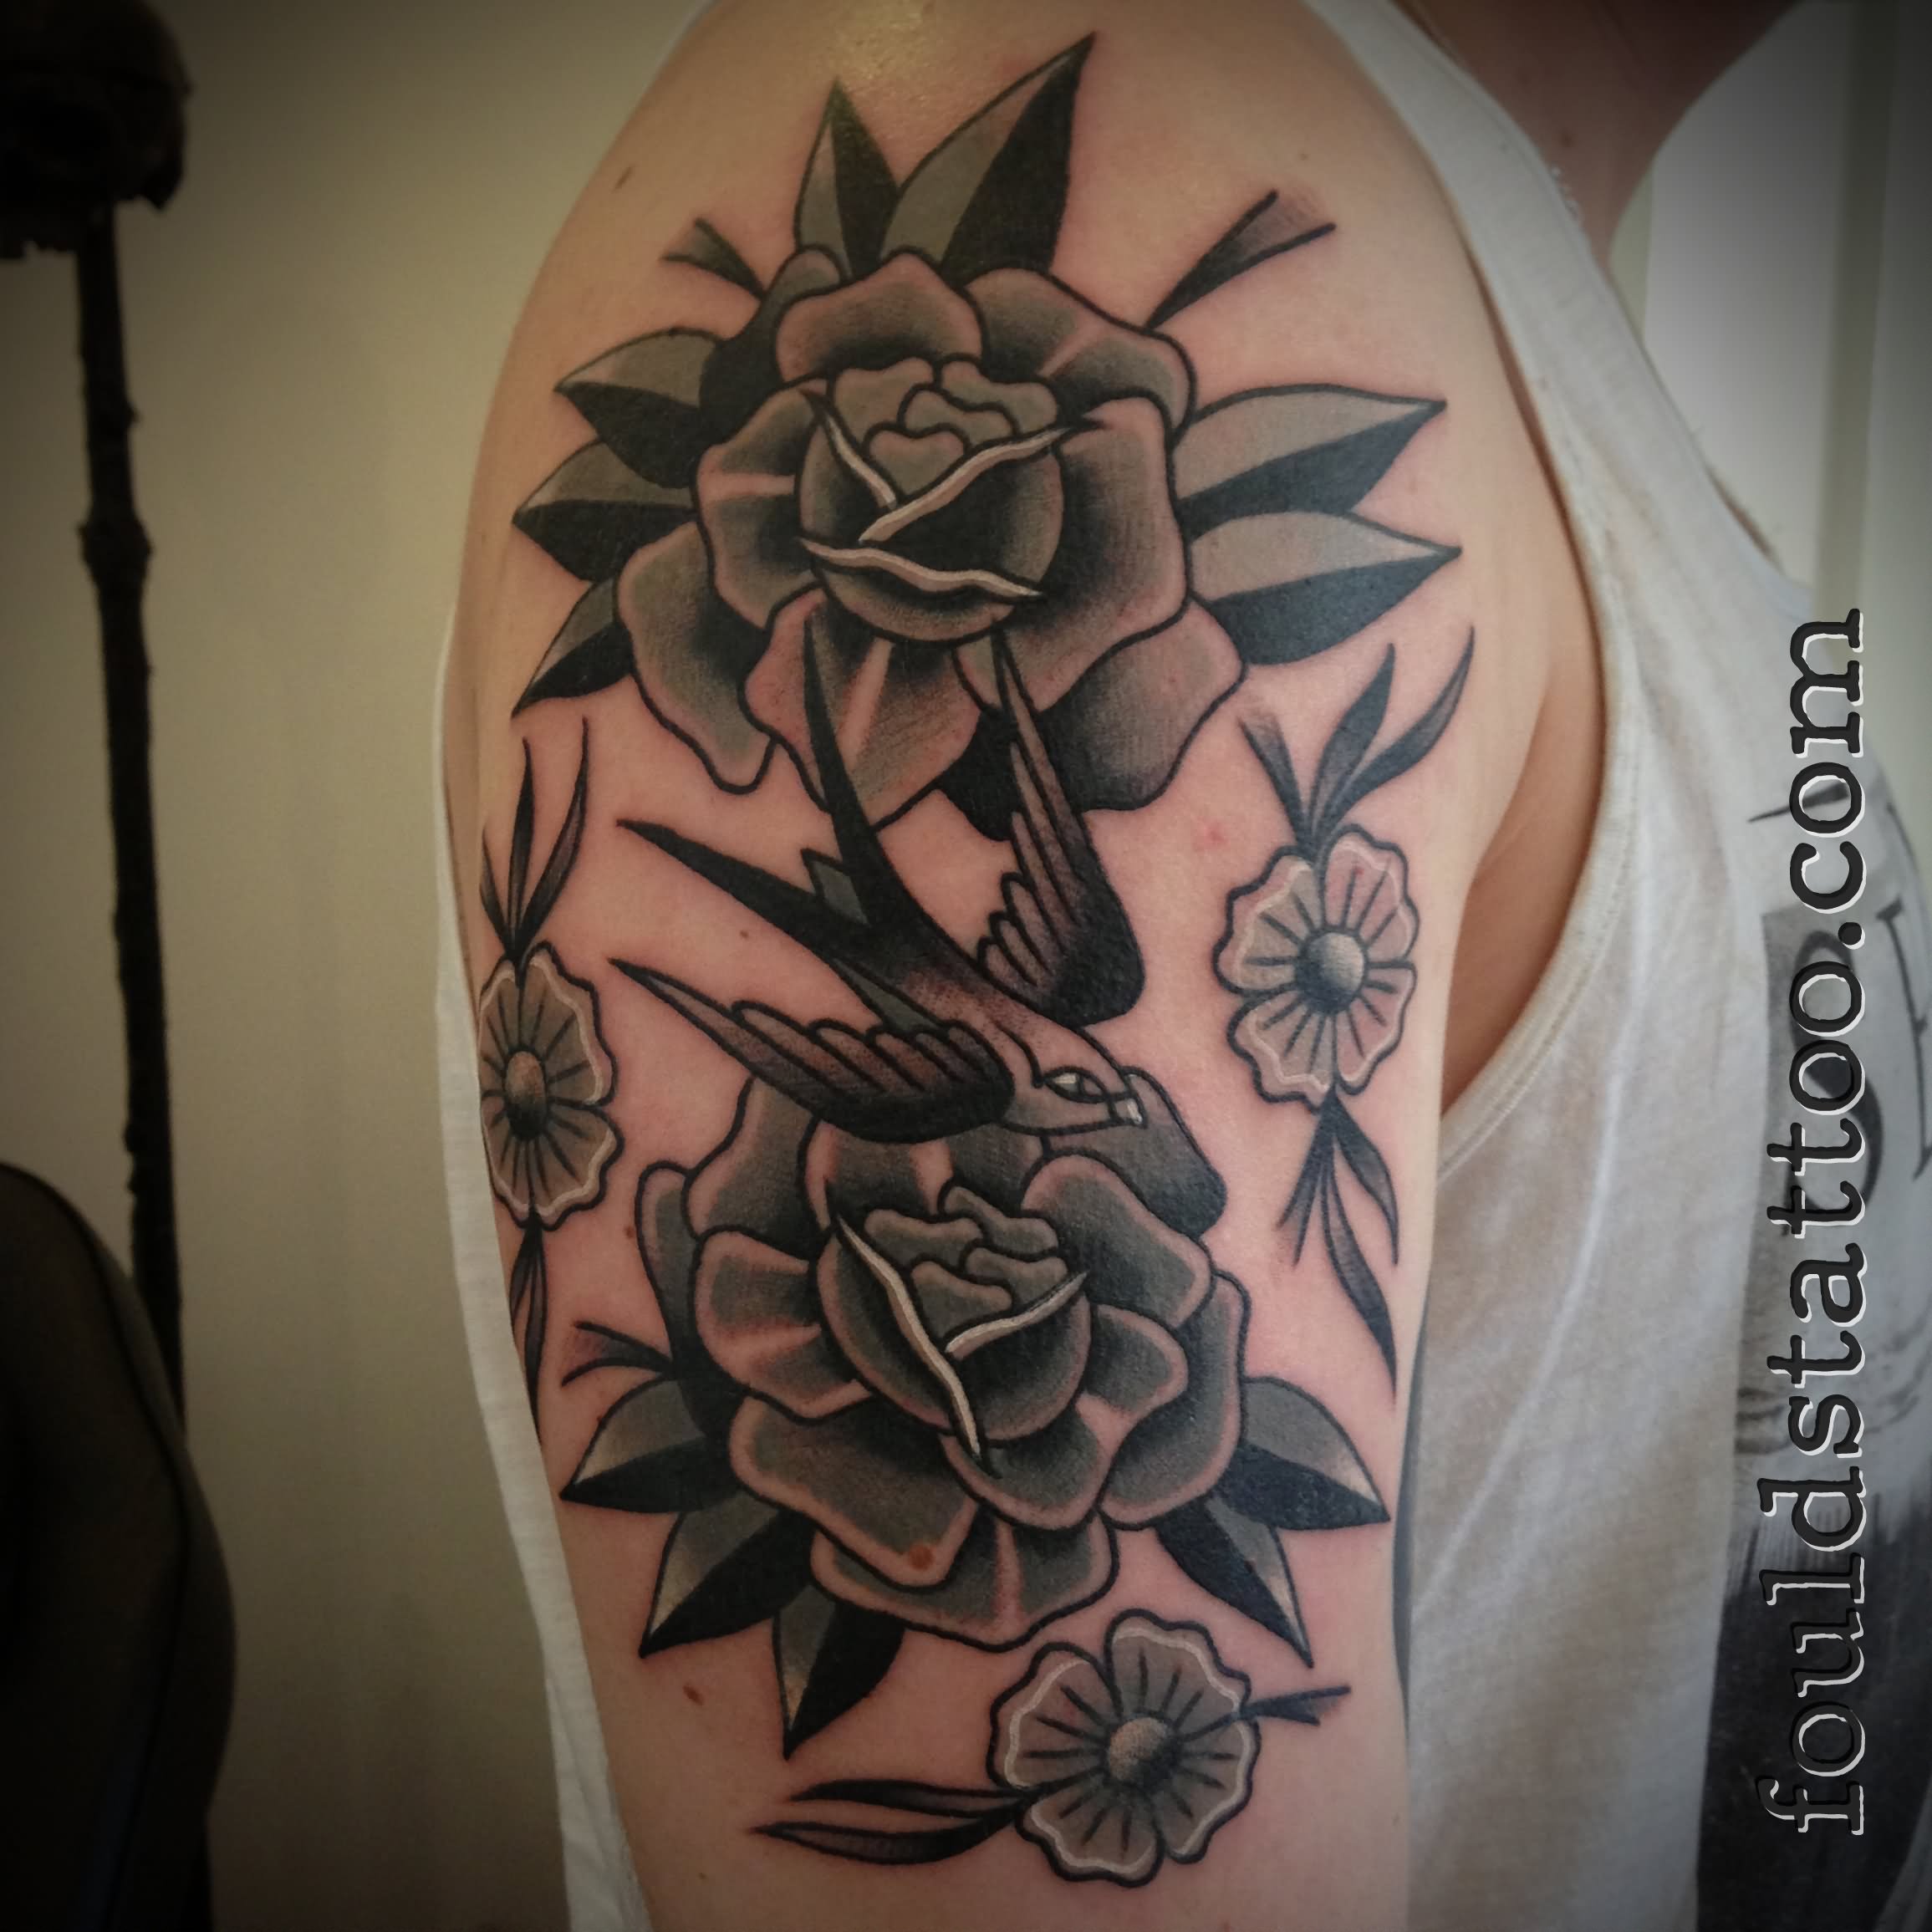 Black & Grey Roses With Swallow Tattoo On Half Sleeve